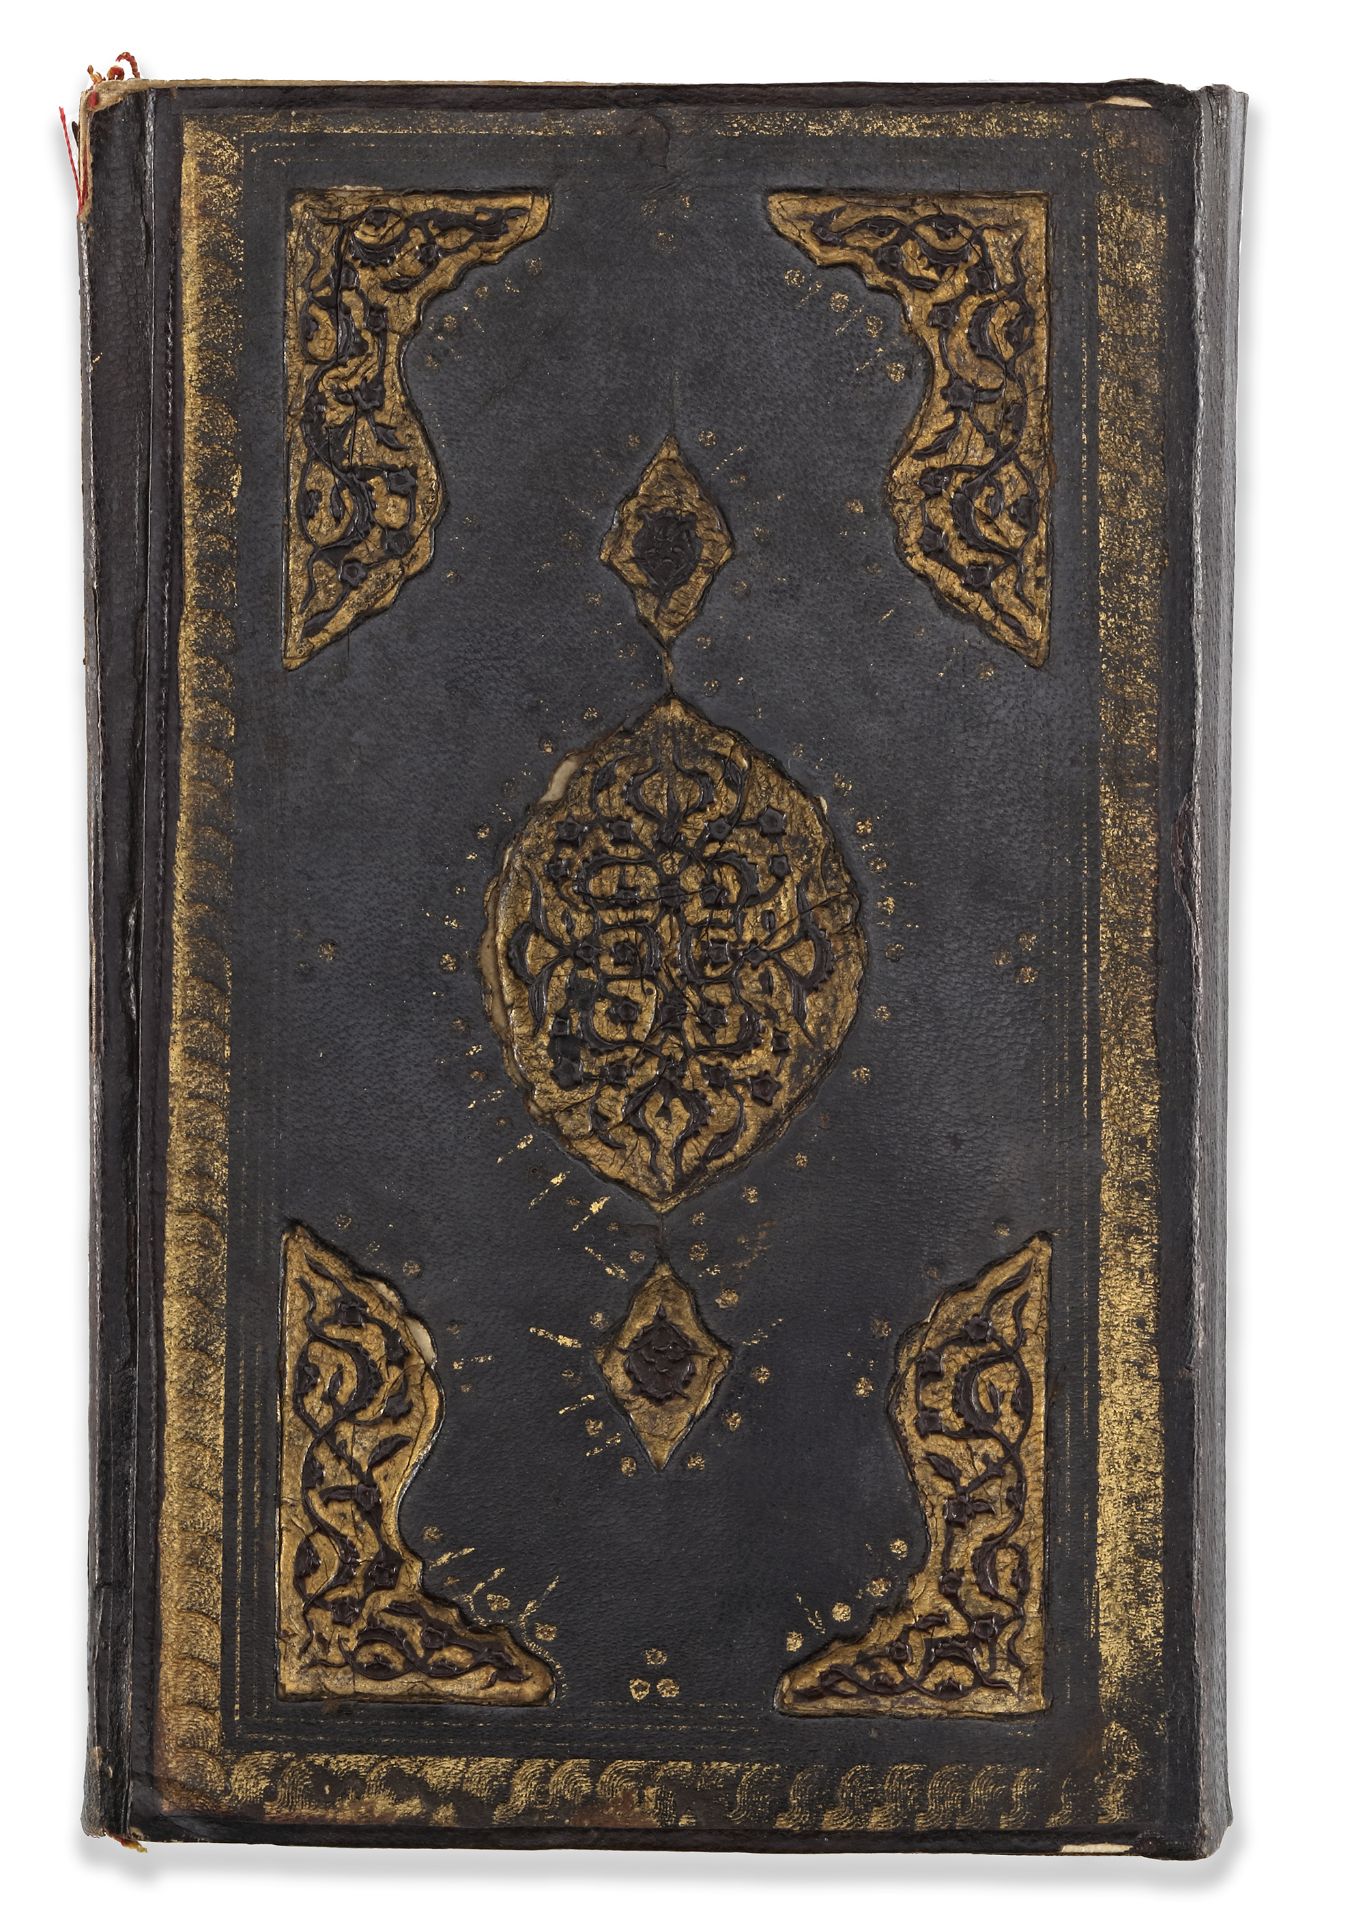 AN OTTOMAN QURAN SIGNED HOCAZADE MEHMED ENVERI, OTTOMAN TURKEY, DATED 1102 AH/1690 AD - Image 6 of 6